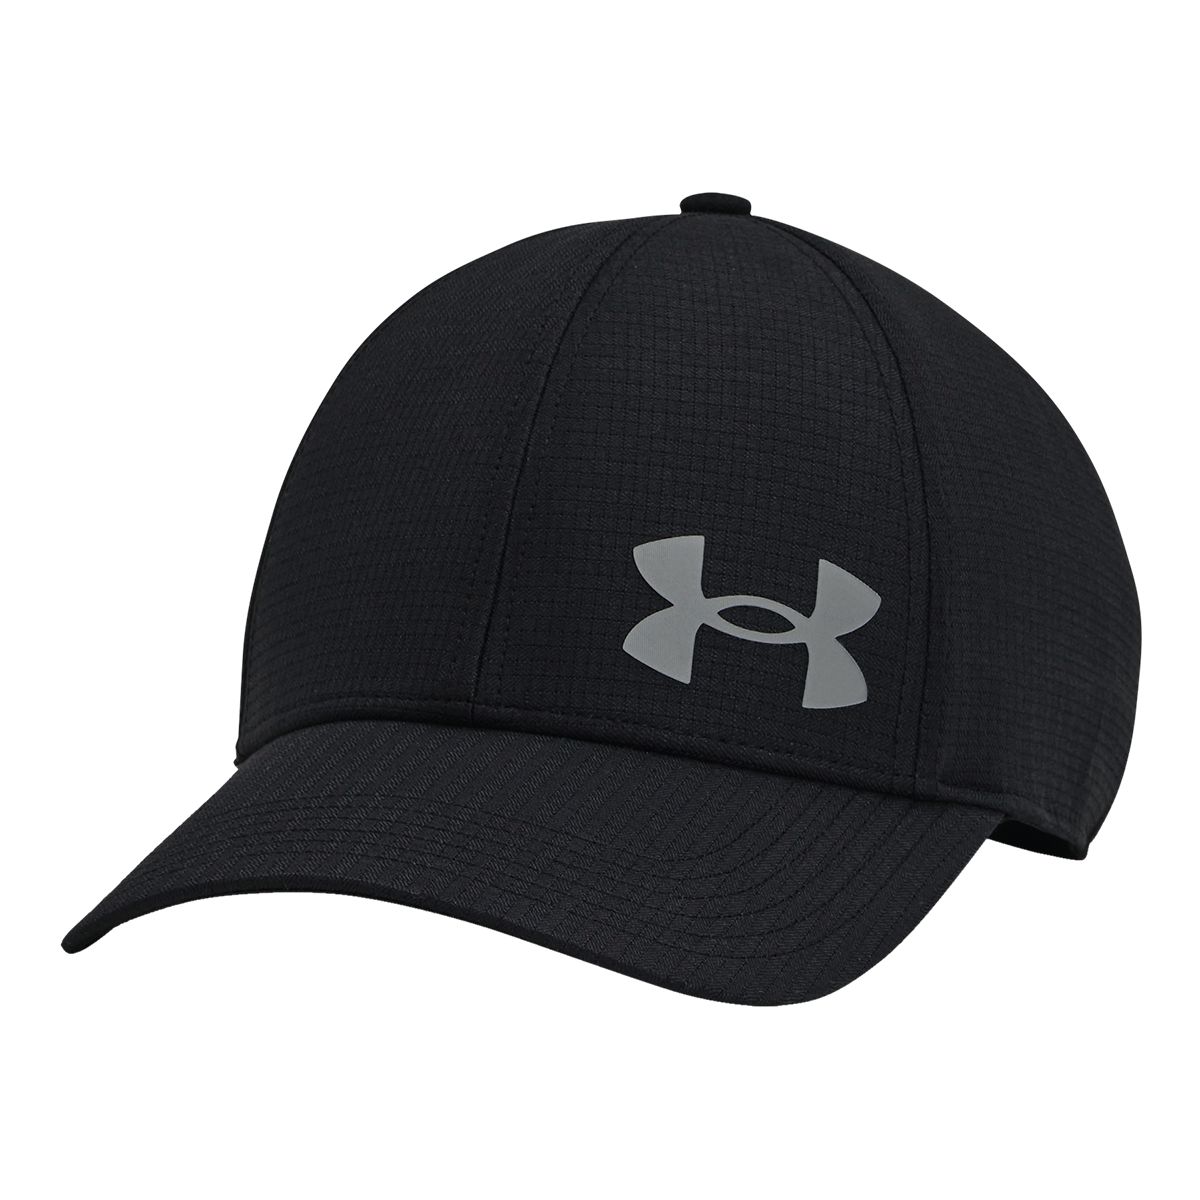 Under Armour Men's Iso-Chill ArmourVent™ Stretch Cap